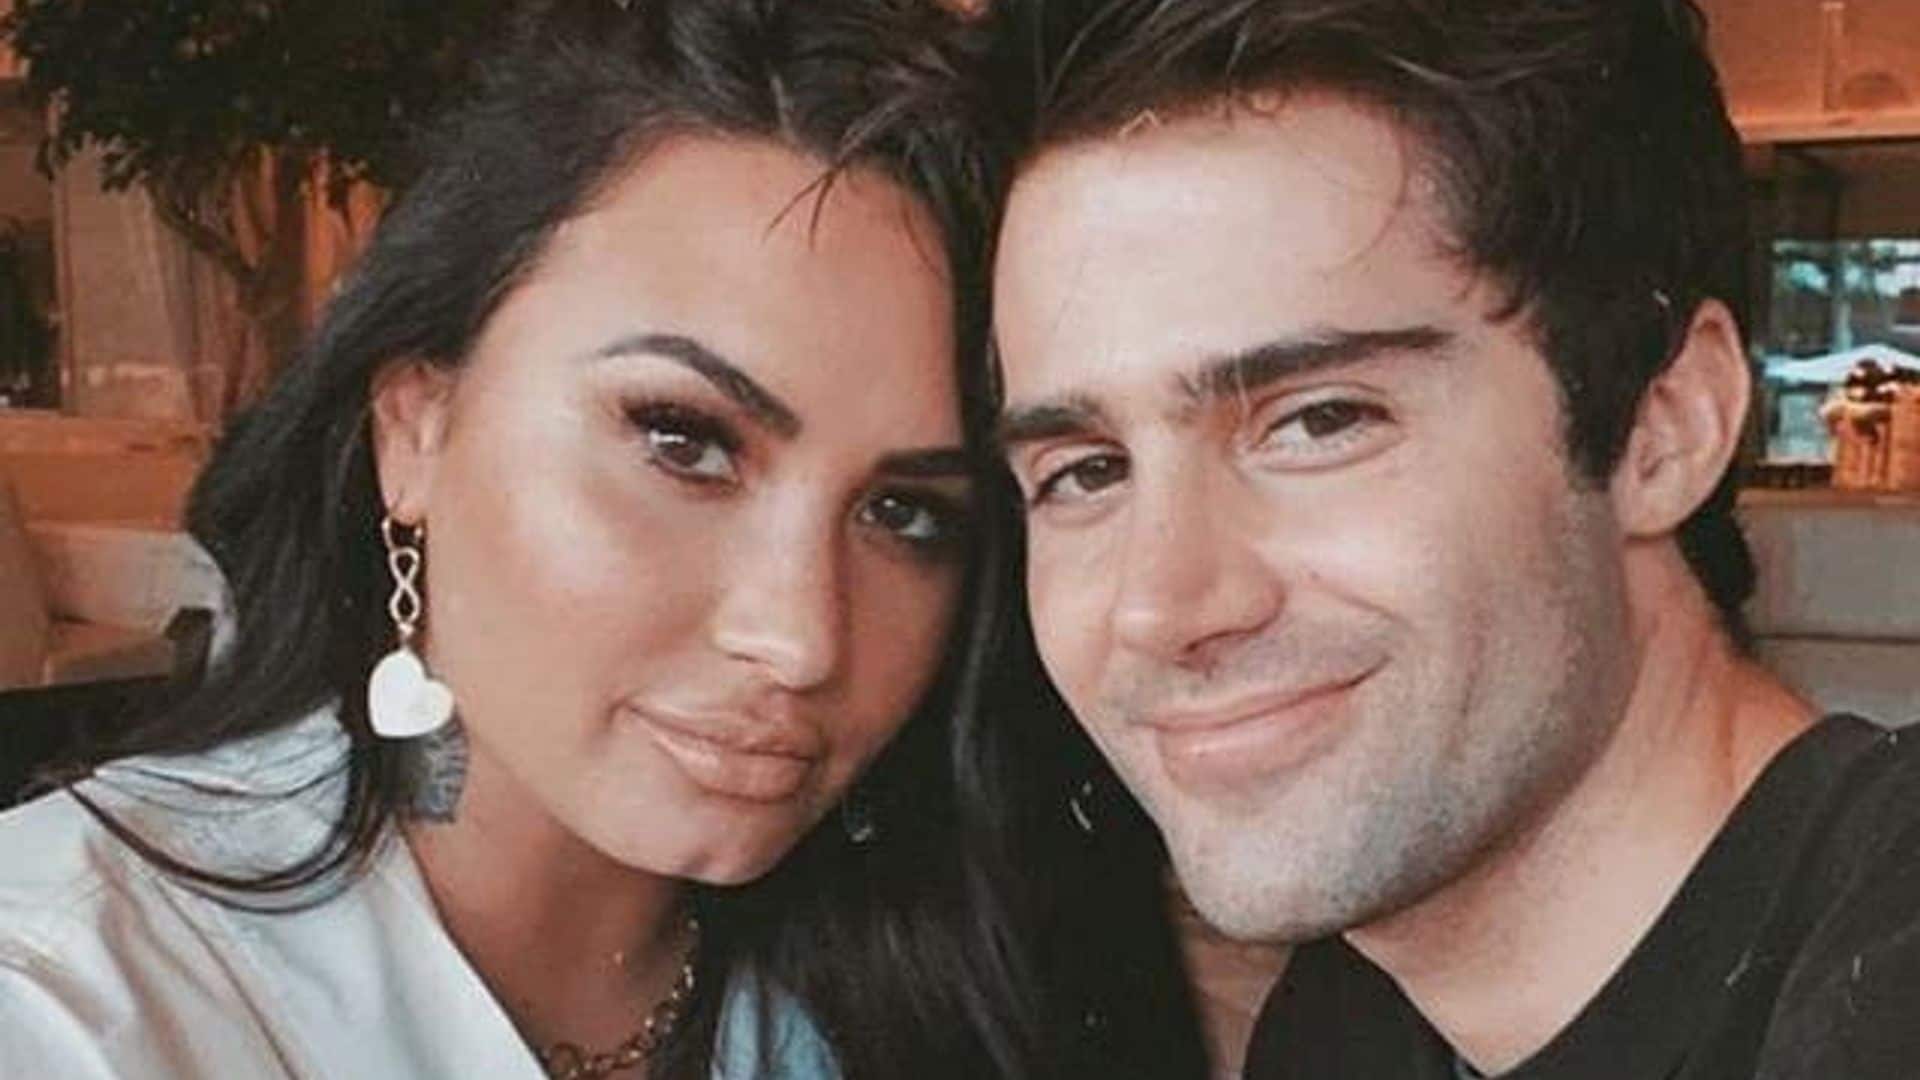 Max Ehrich addressed his split from Demi Lovato